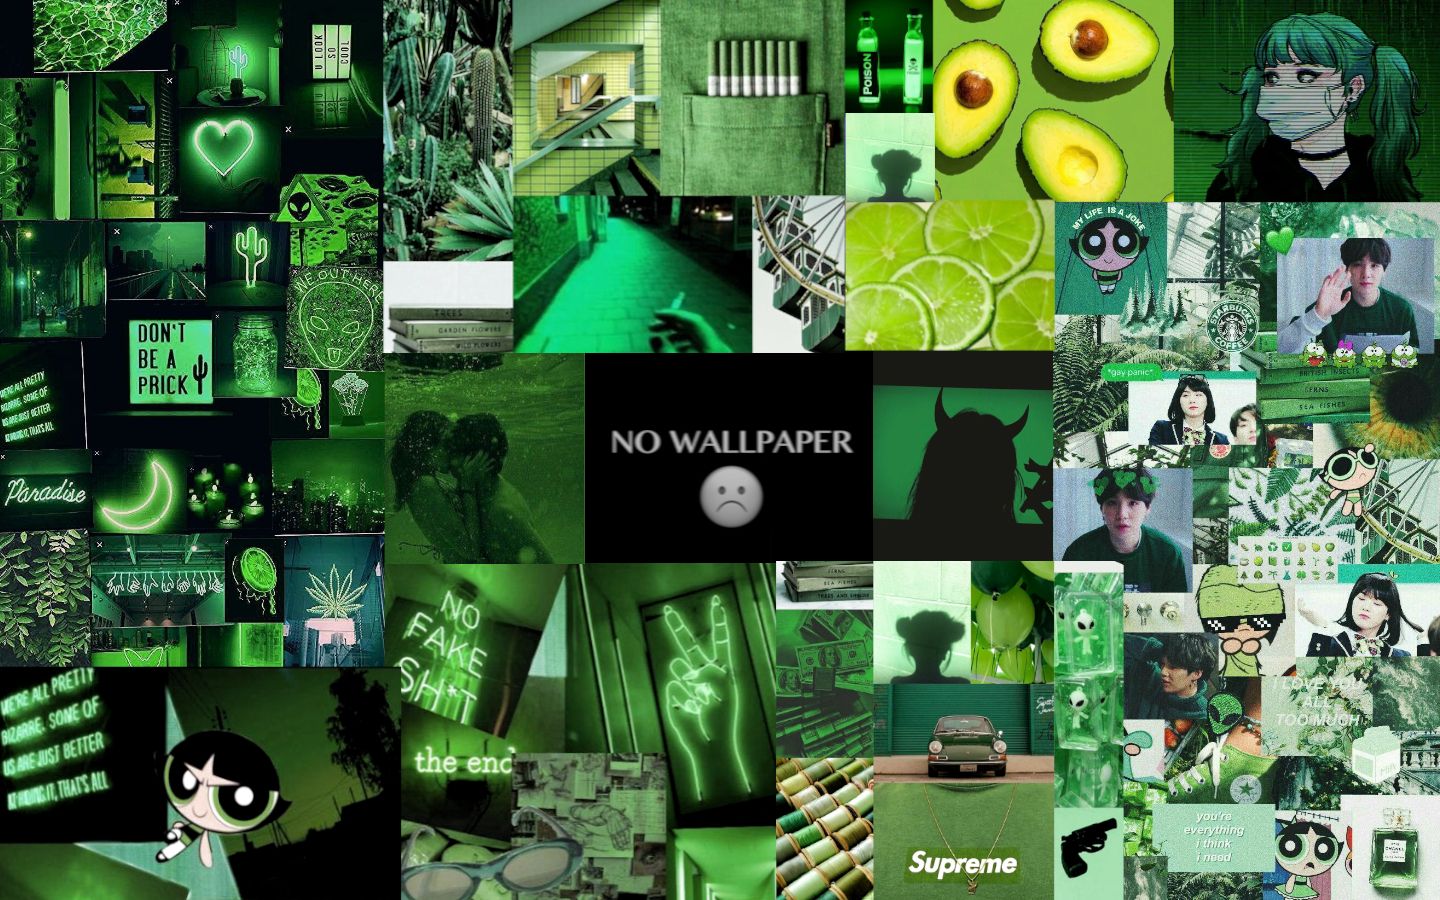 A collage of green images with different characters - Lime green, neon green